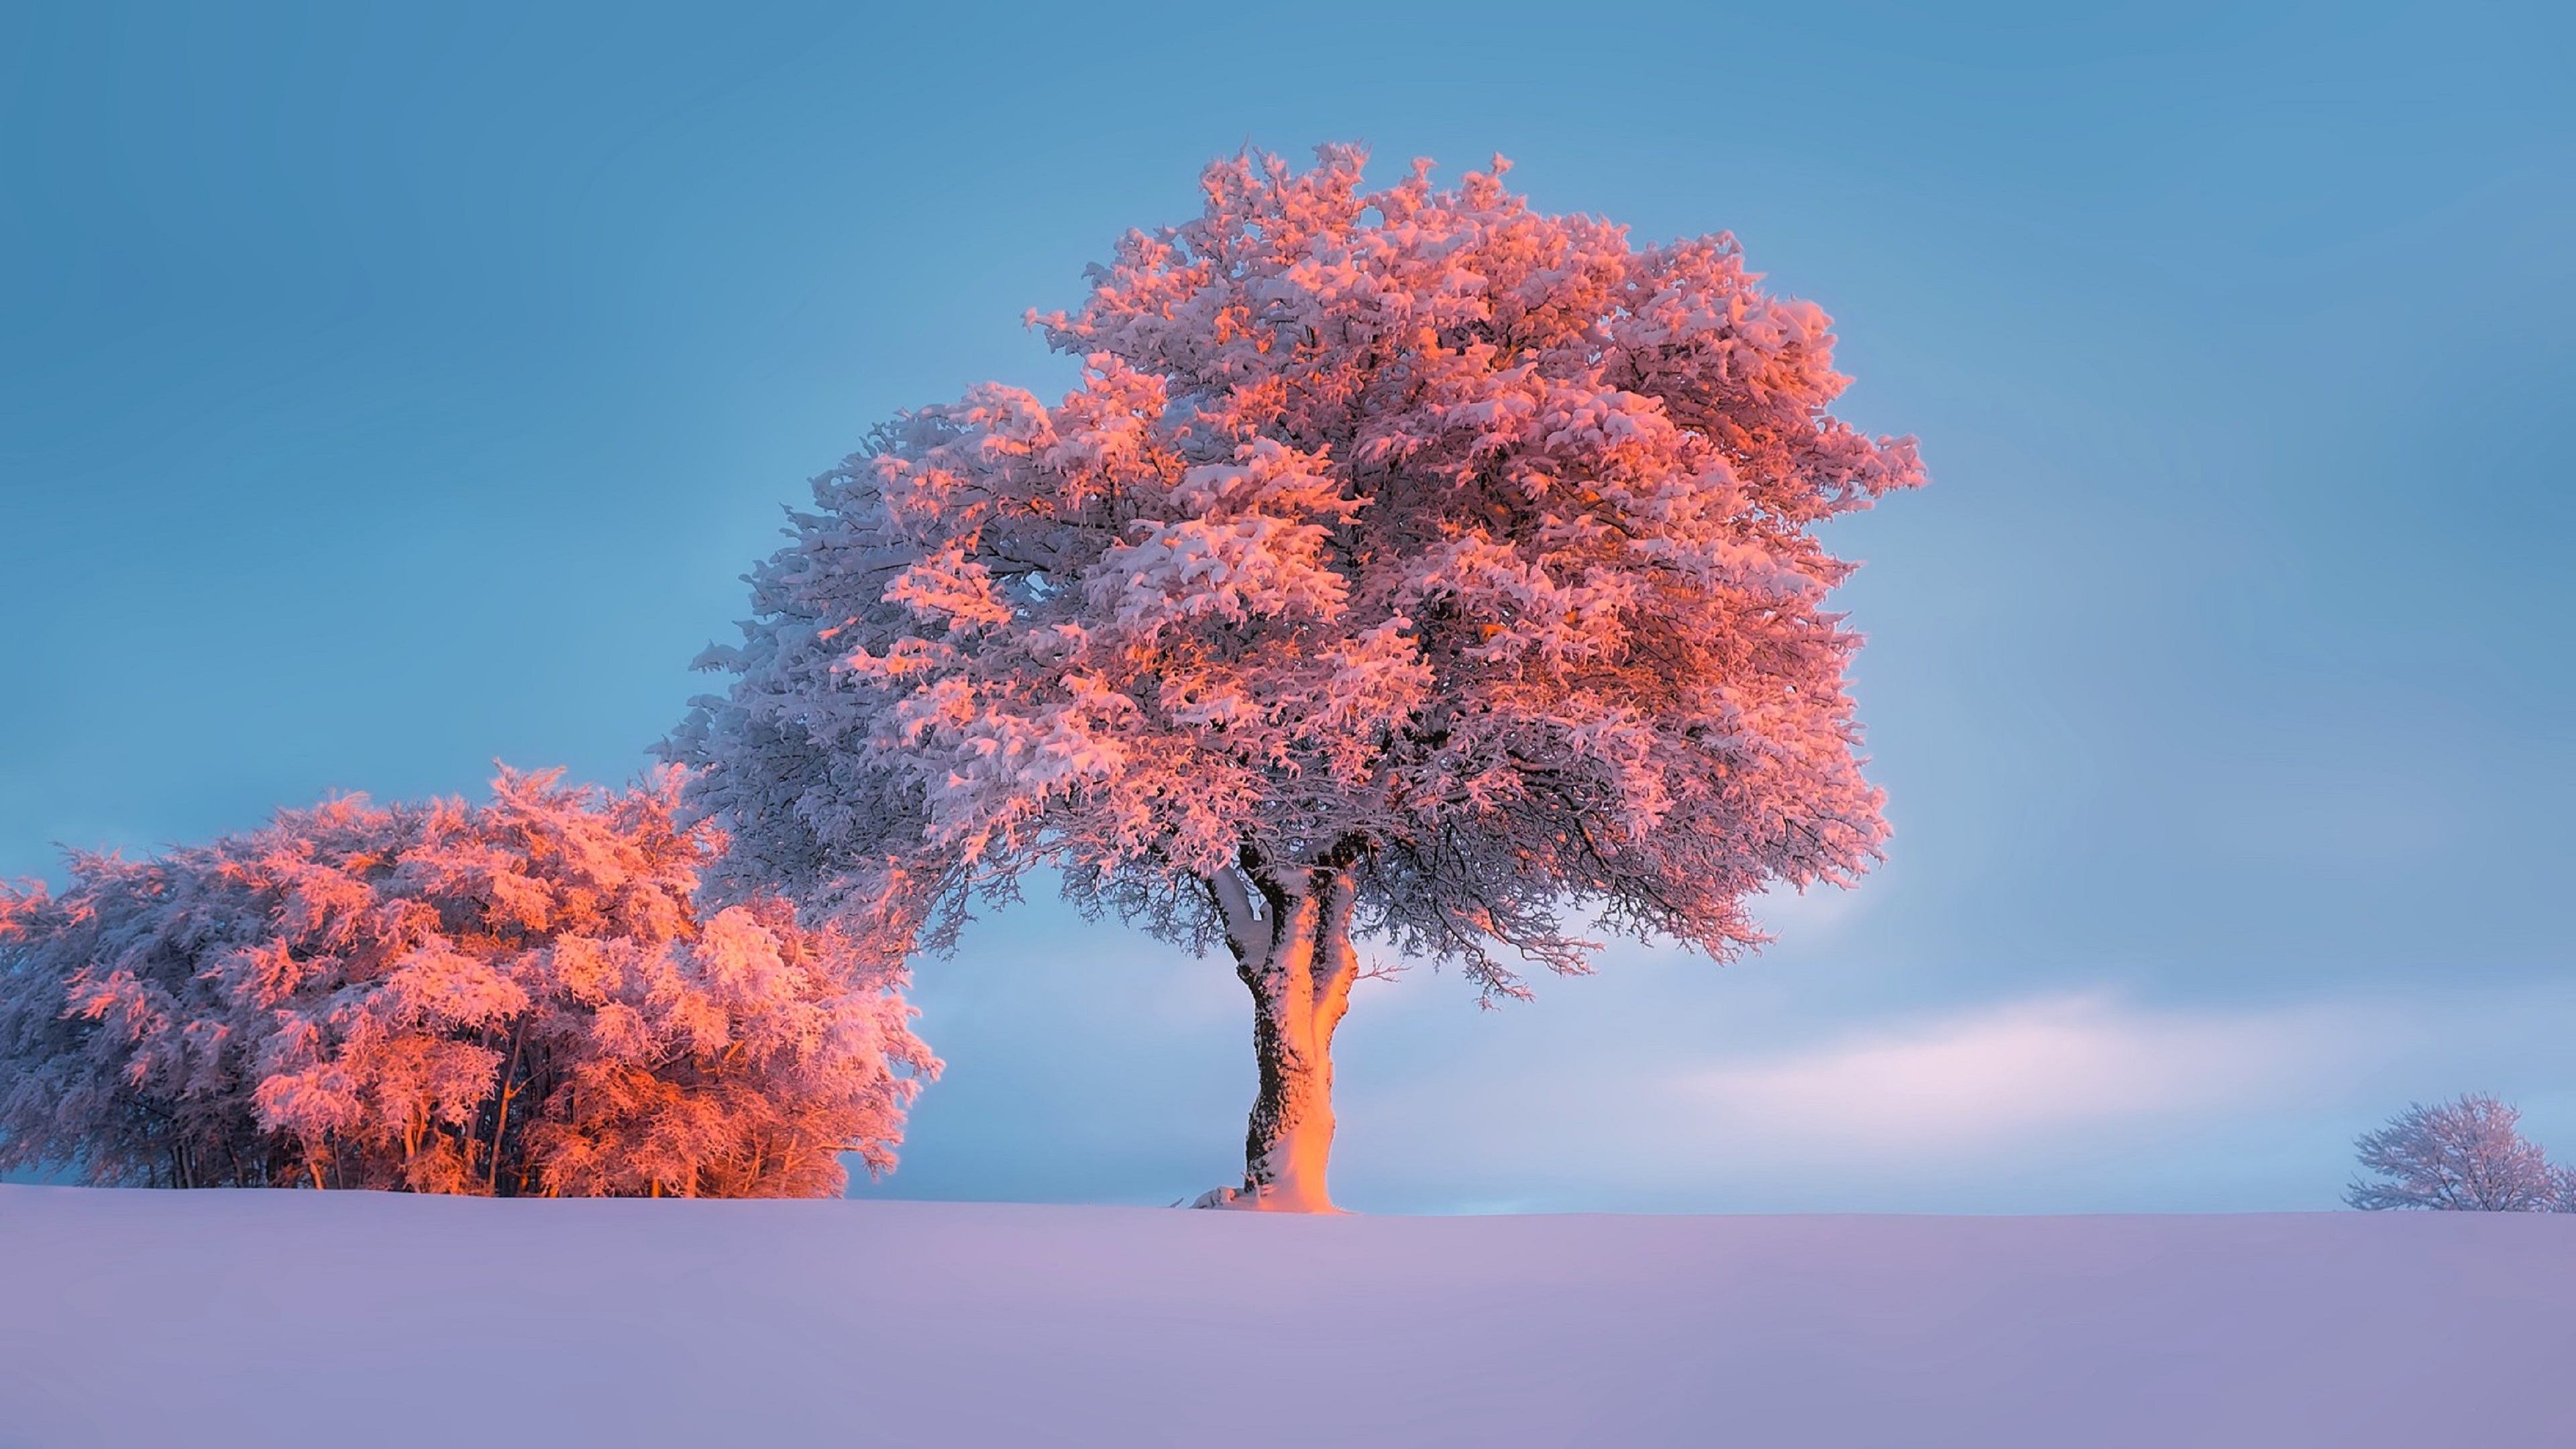 General 3840x2160 winter nature trees snow